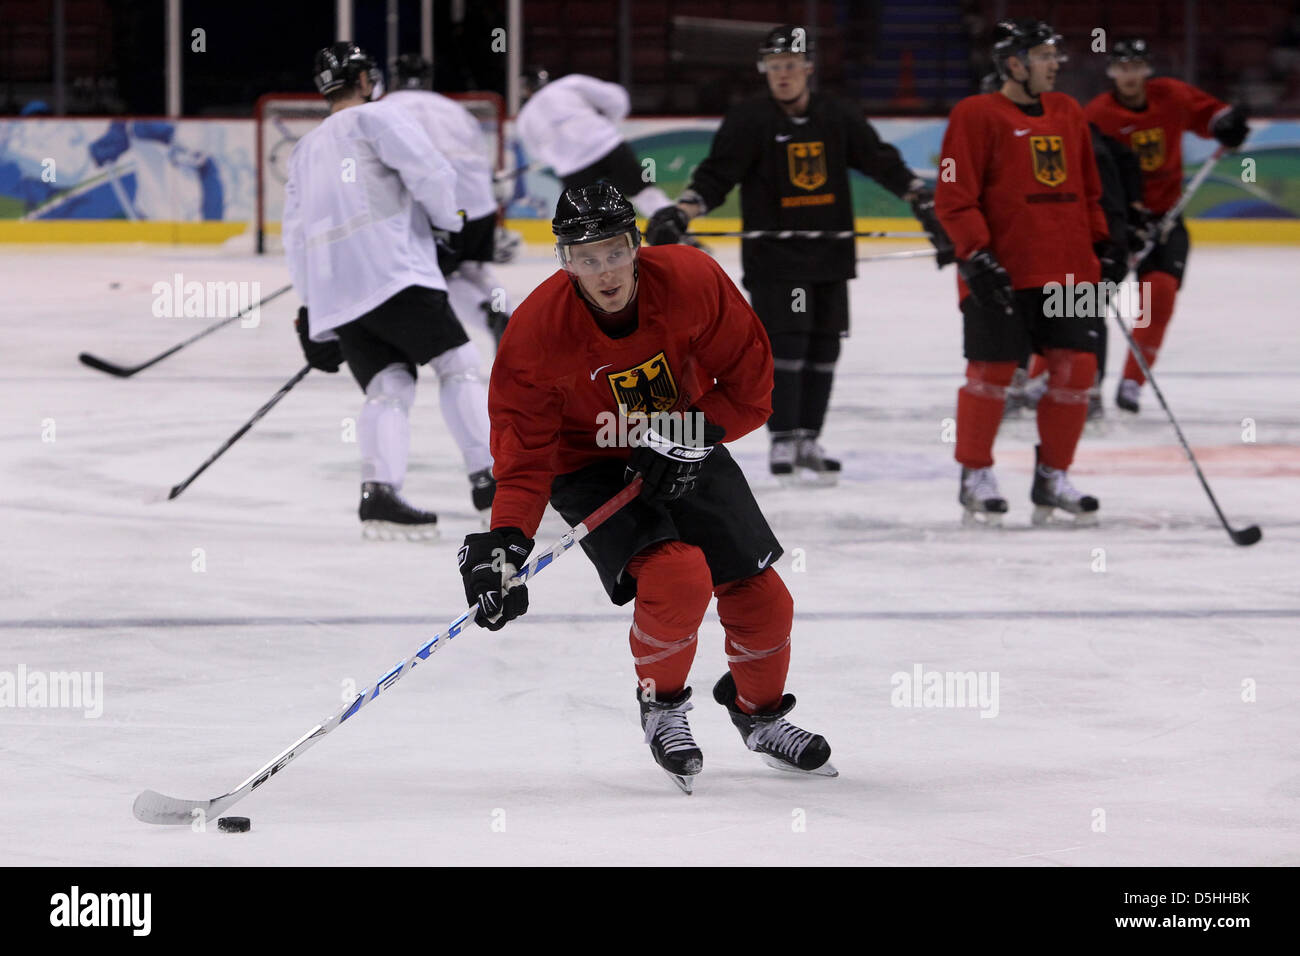 Travis James Mulock (front) of Germany practices during a Ice Hockey training session in Canada Hockey Place, Vancouver, Canada, 15 February 2010. Photo: Daniel Karmann  +++(c) dpa - Bildfunk+++ Stock Photo